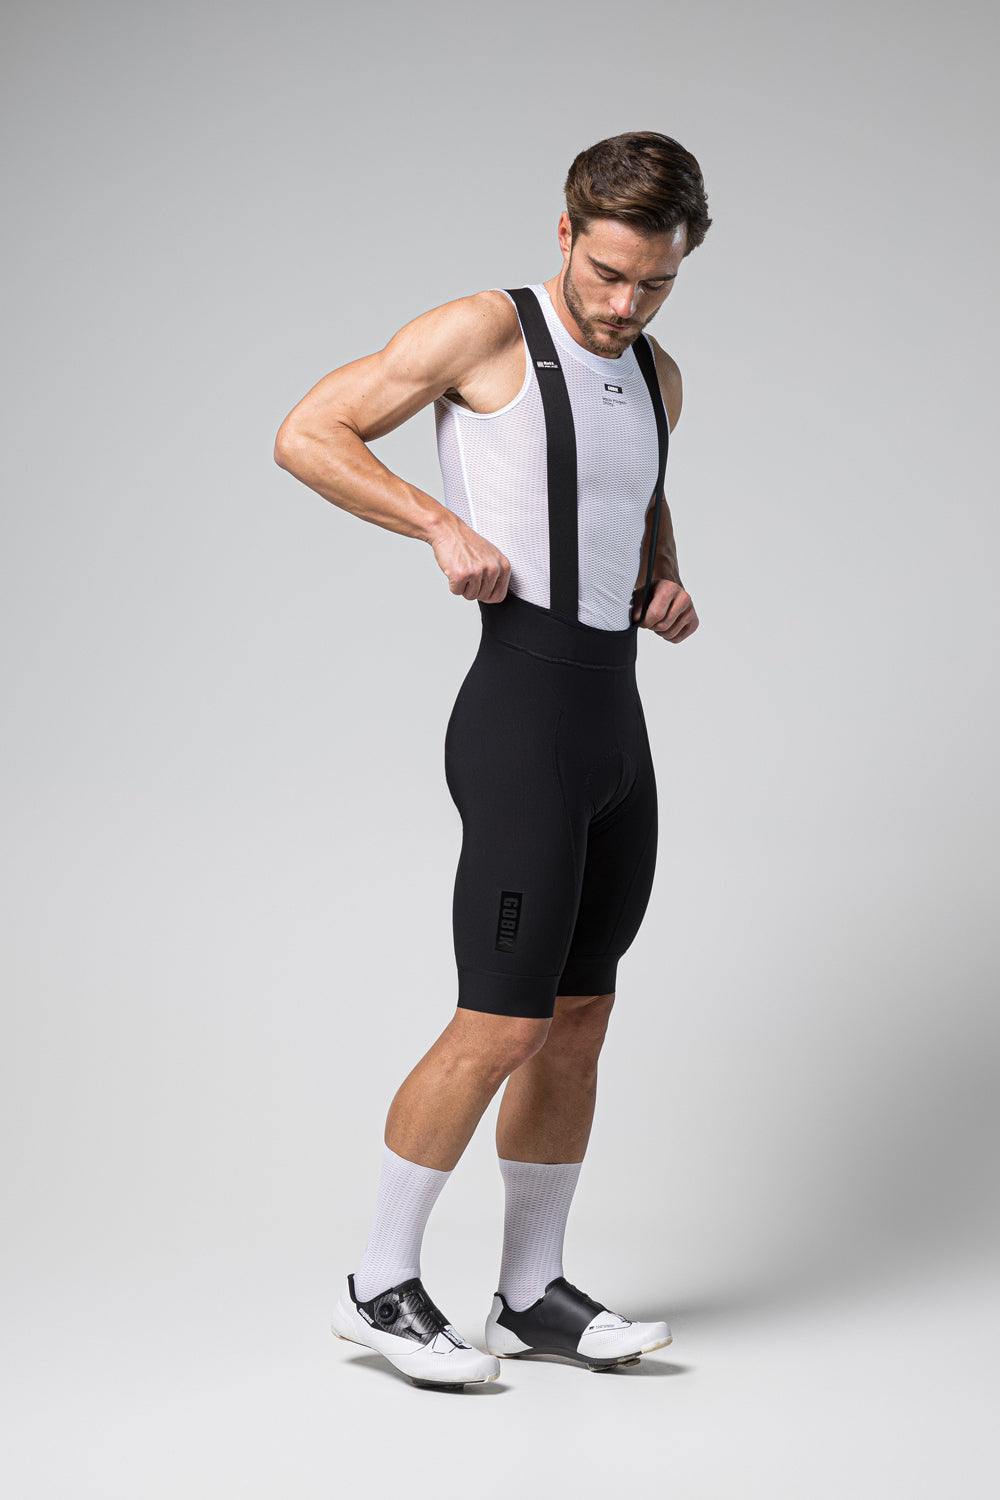 Cycling Clothing  ProBikeKit Canada